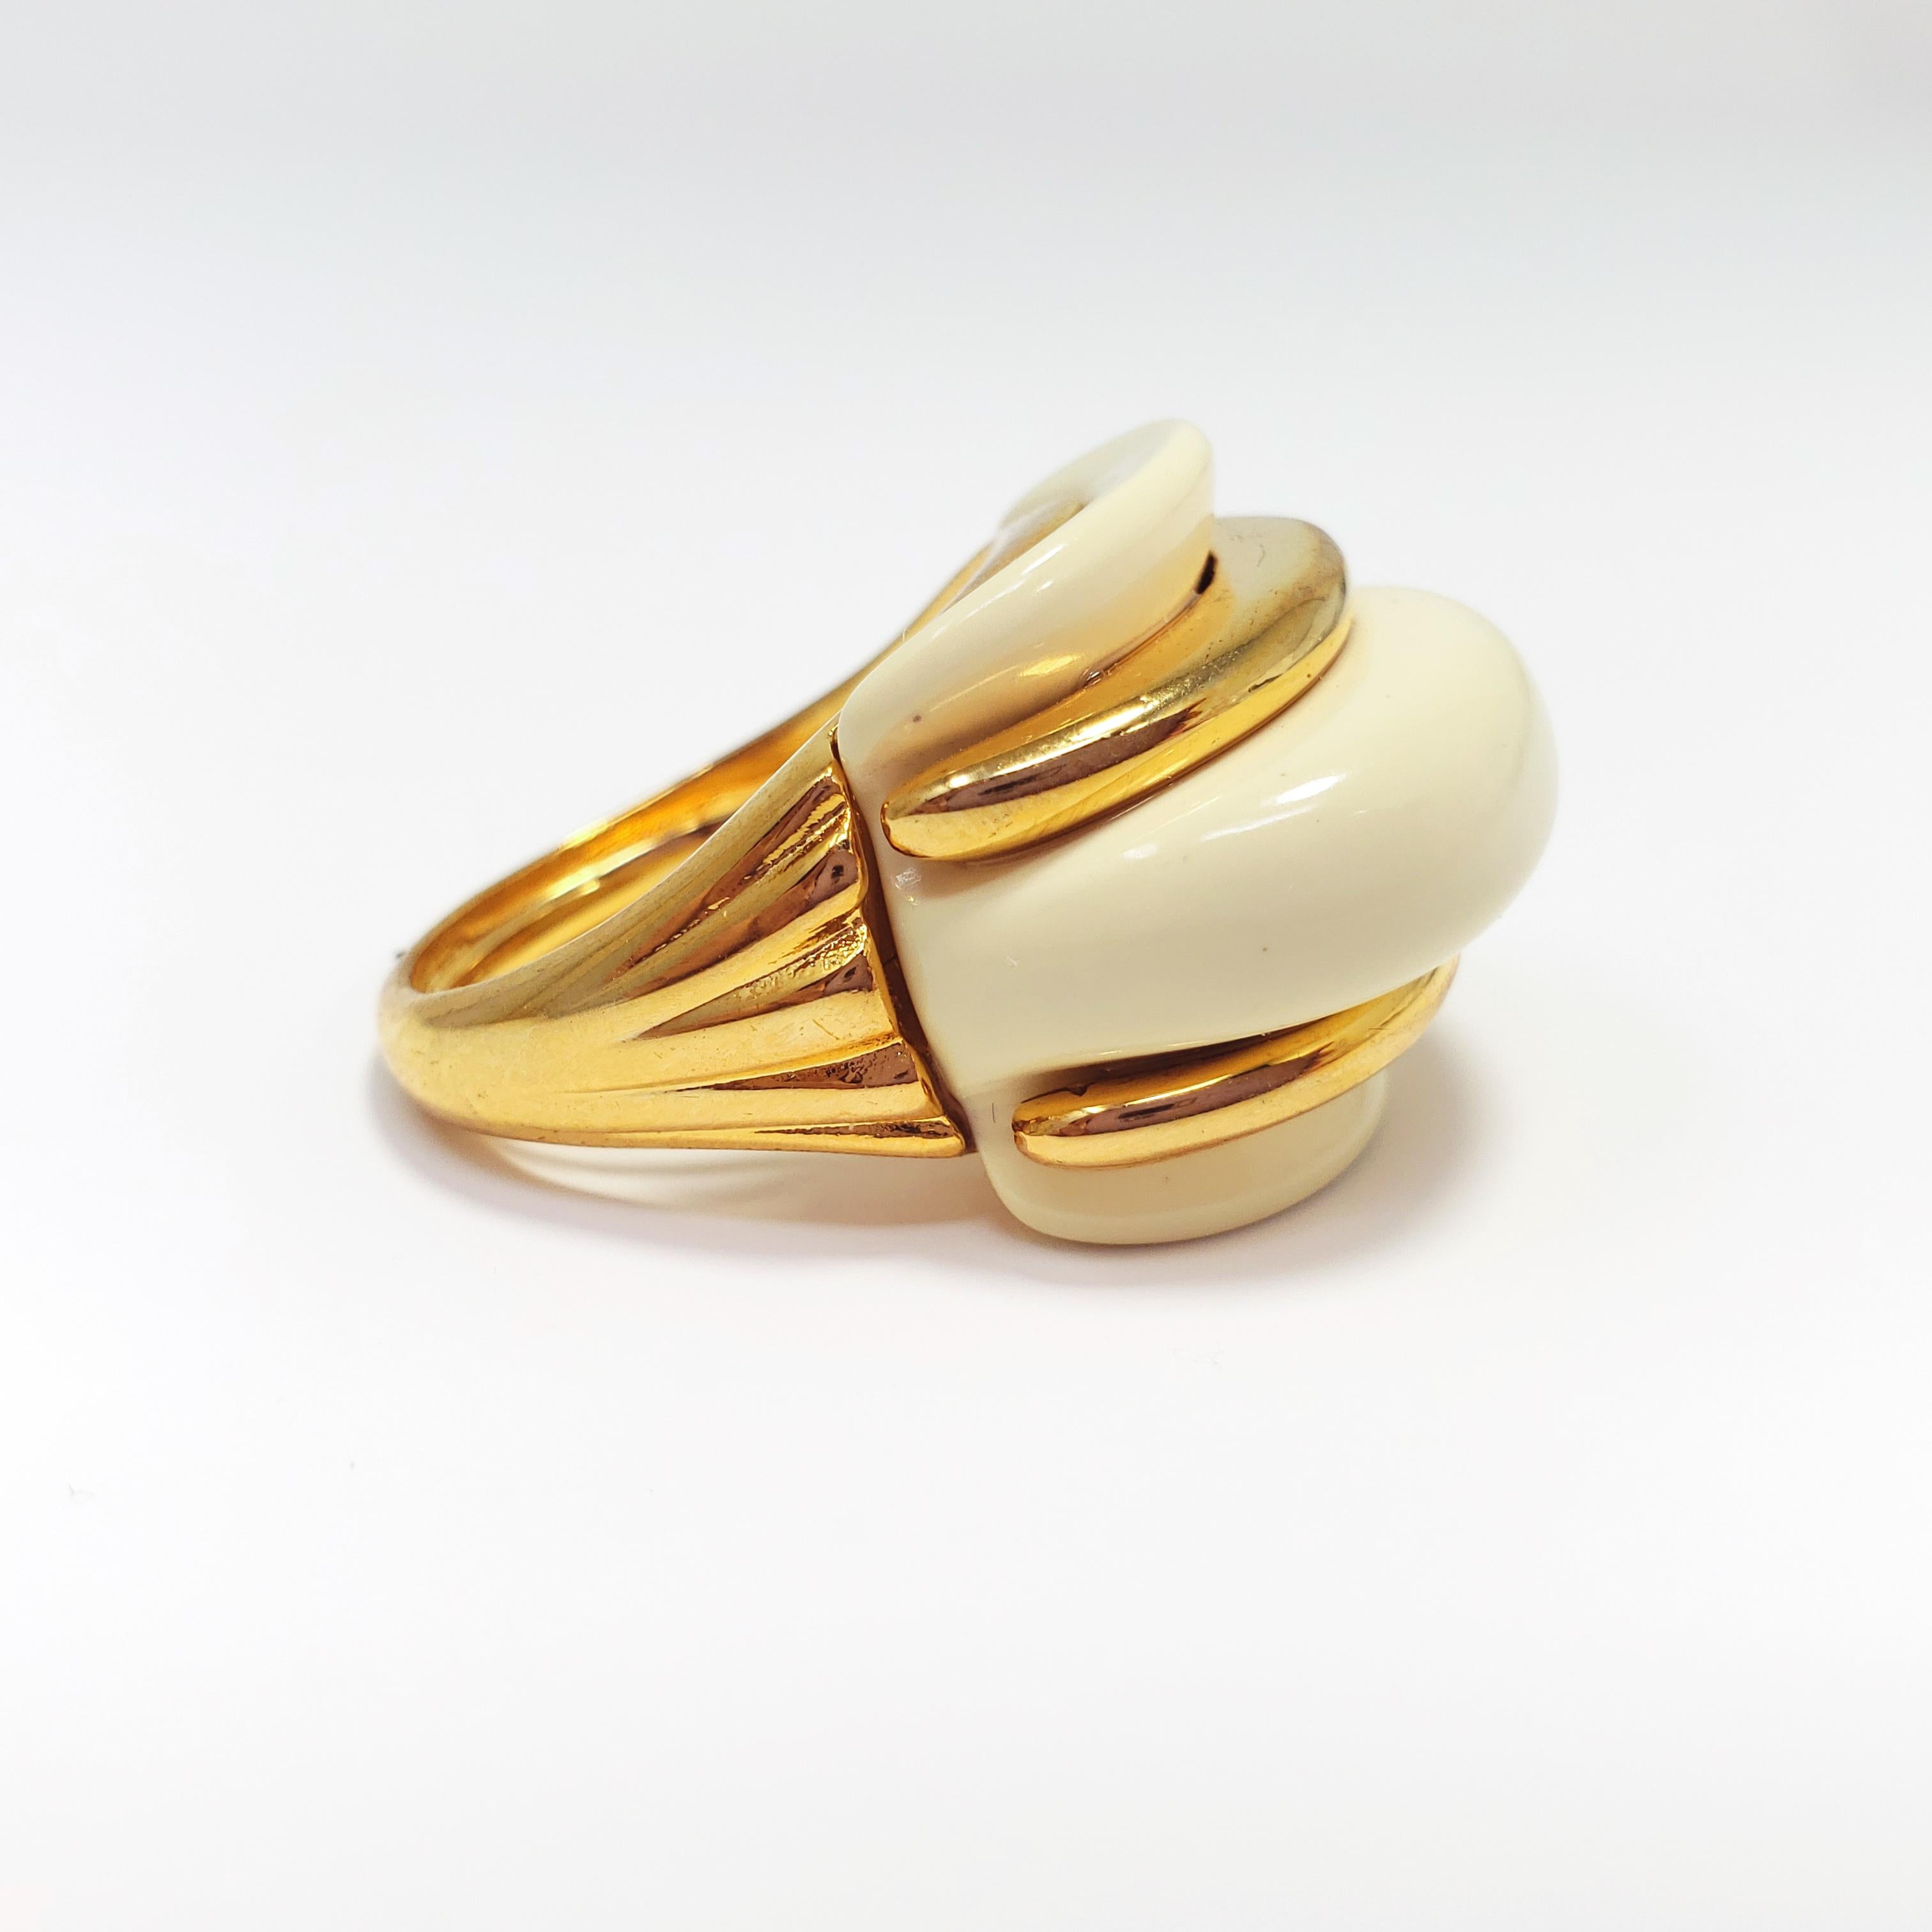 A stylish statement ring by Kenneth Jay Lane. This cocktail ring features cream resin accented with gold-plated metal for a bold yet sophisticated look.

Ring face height: 2.1 cm
Adjustable ring size, fits US 4-8
Hallmarks: © KJL, Made in USA